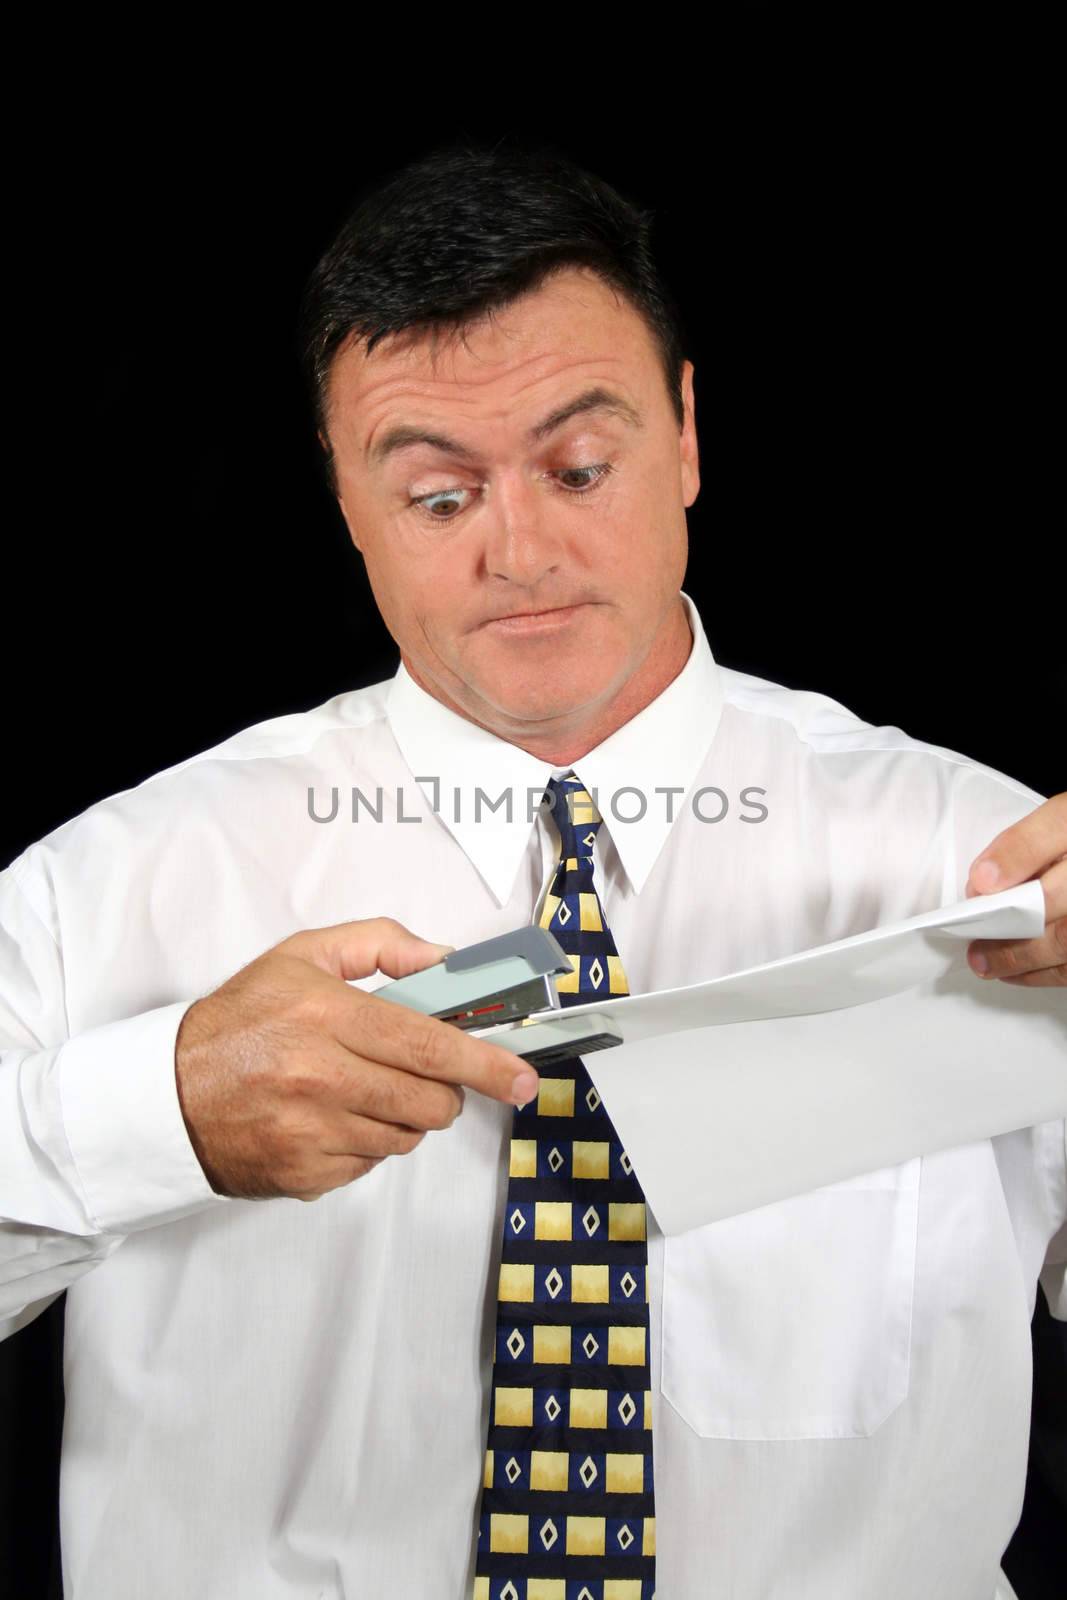 Admin salesman catches up with his paperwork.